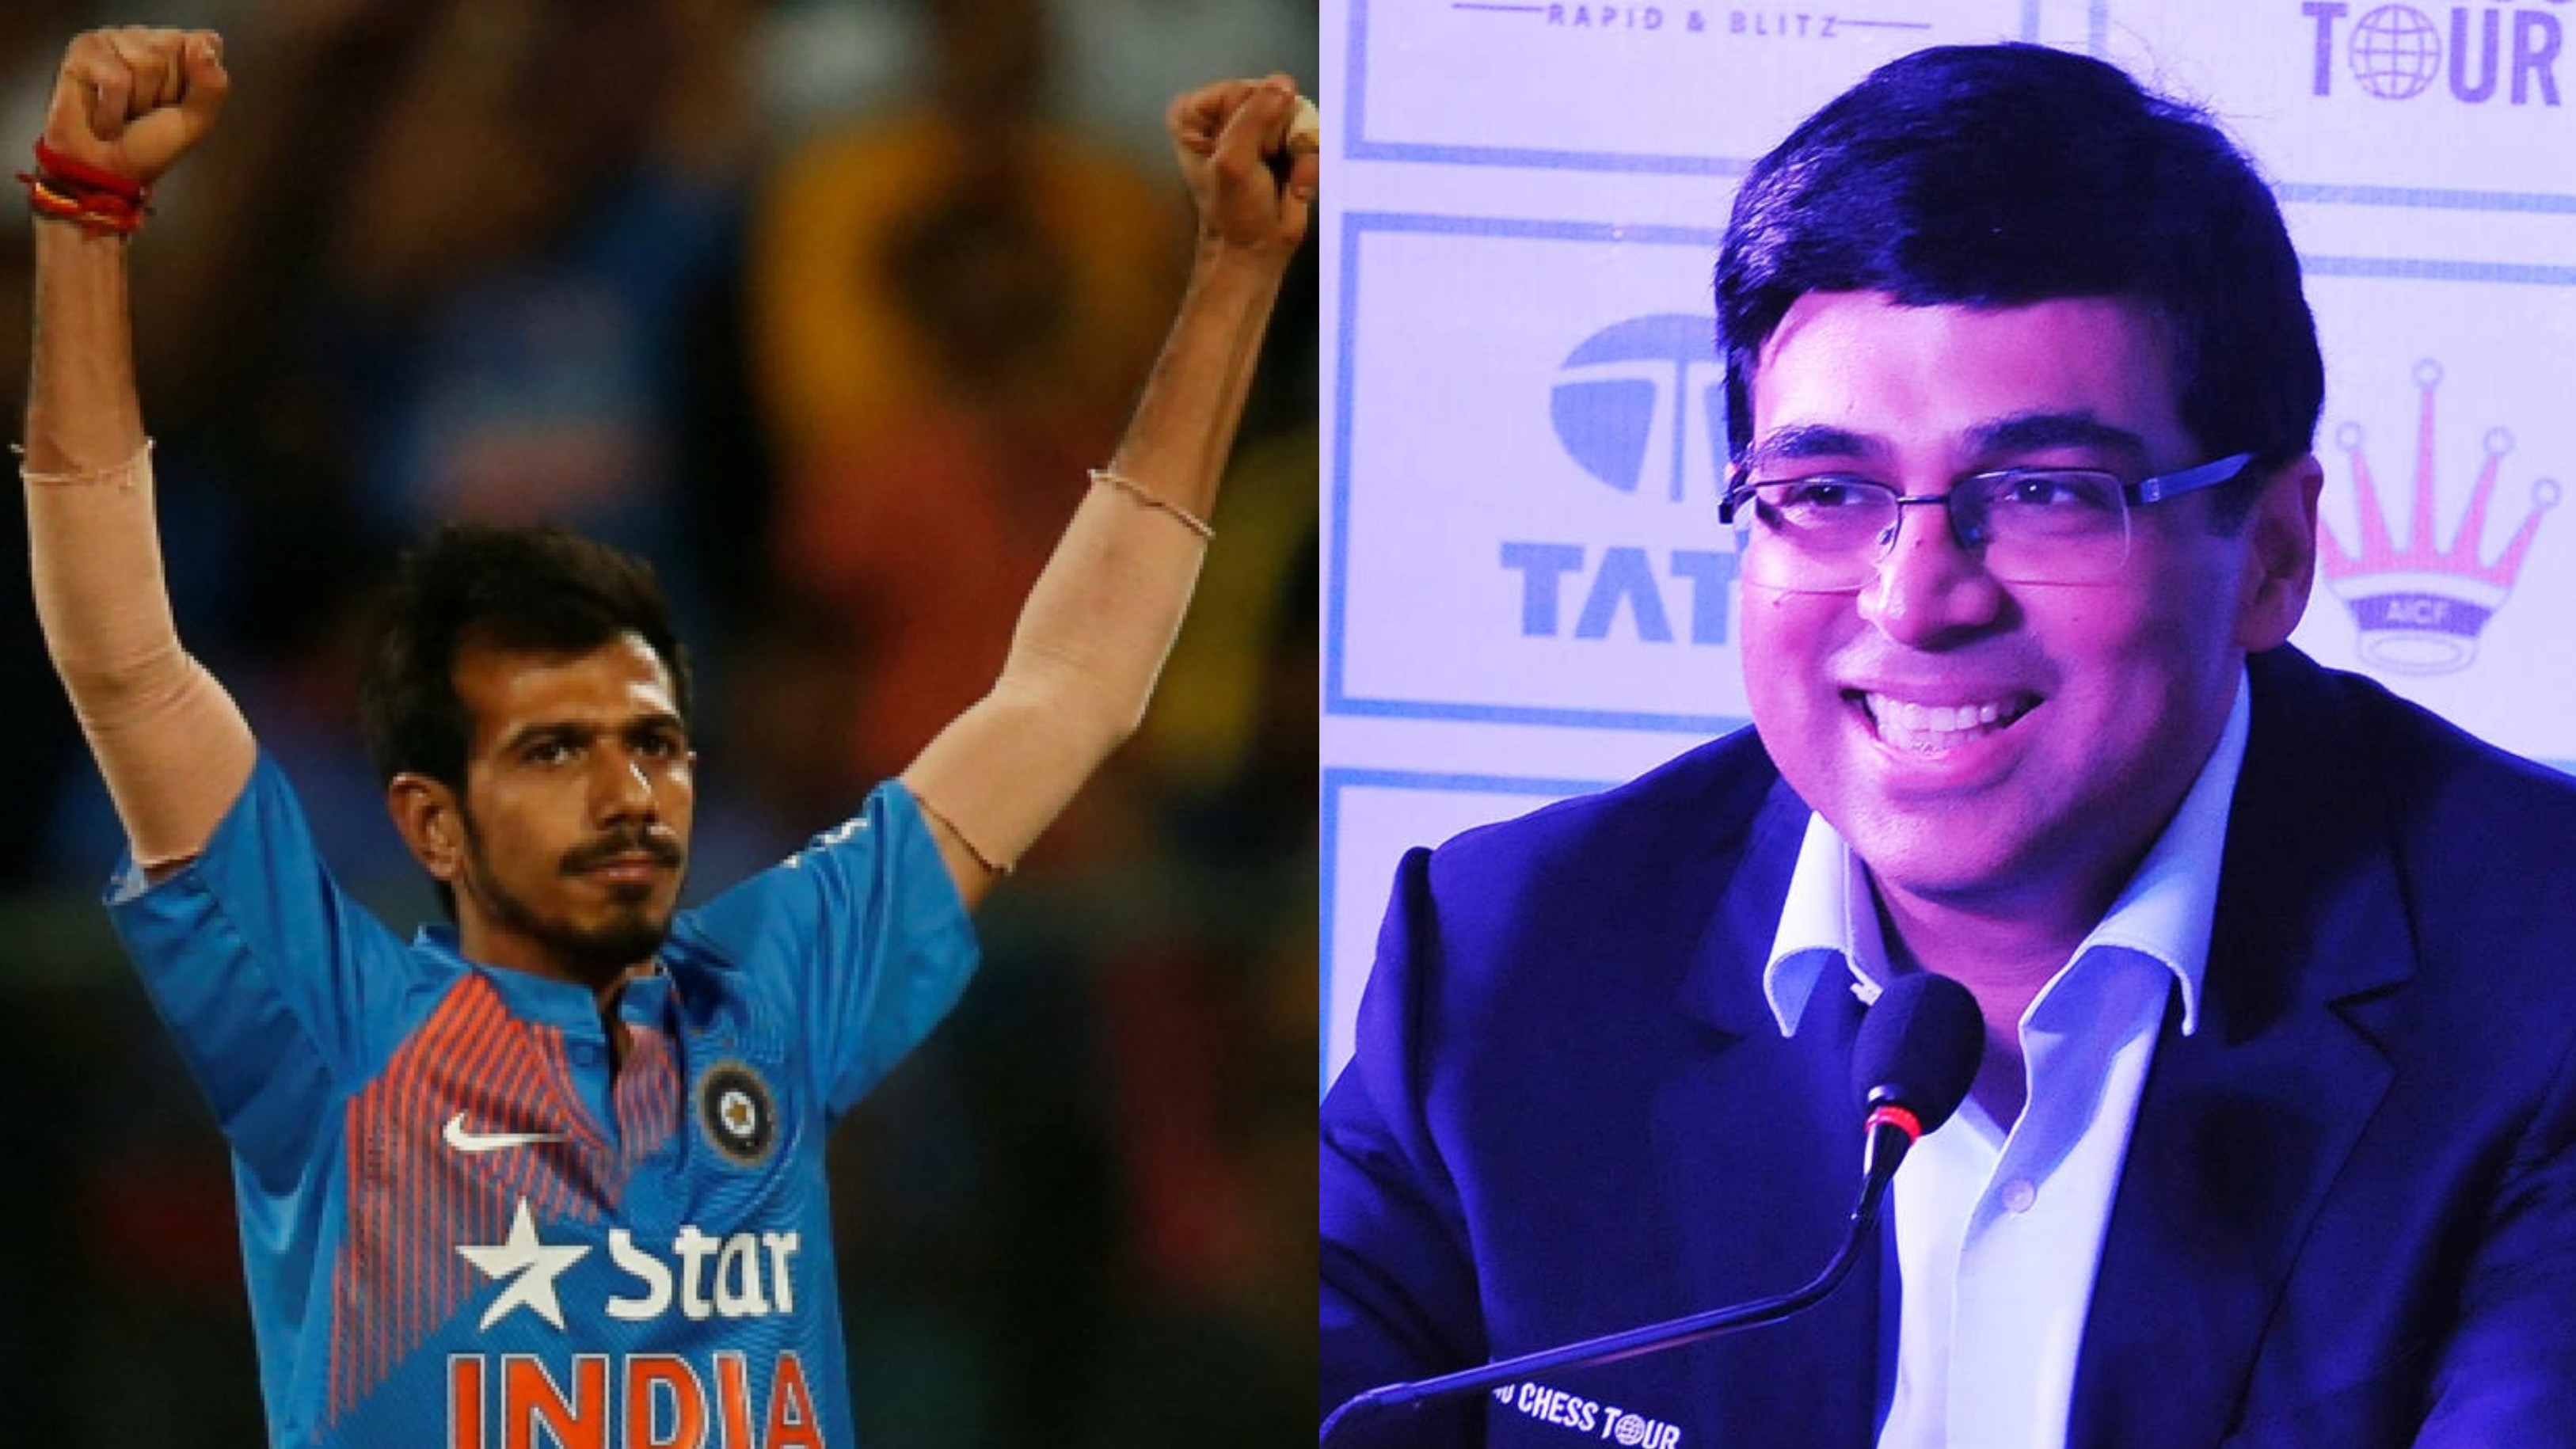 Viswanathan Anand and Yuzvendra Chahal raise Rs 8.8 lakh for waste pickers community 